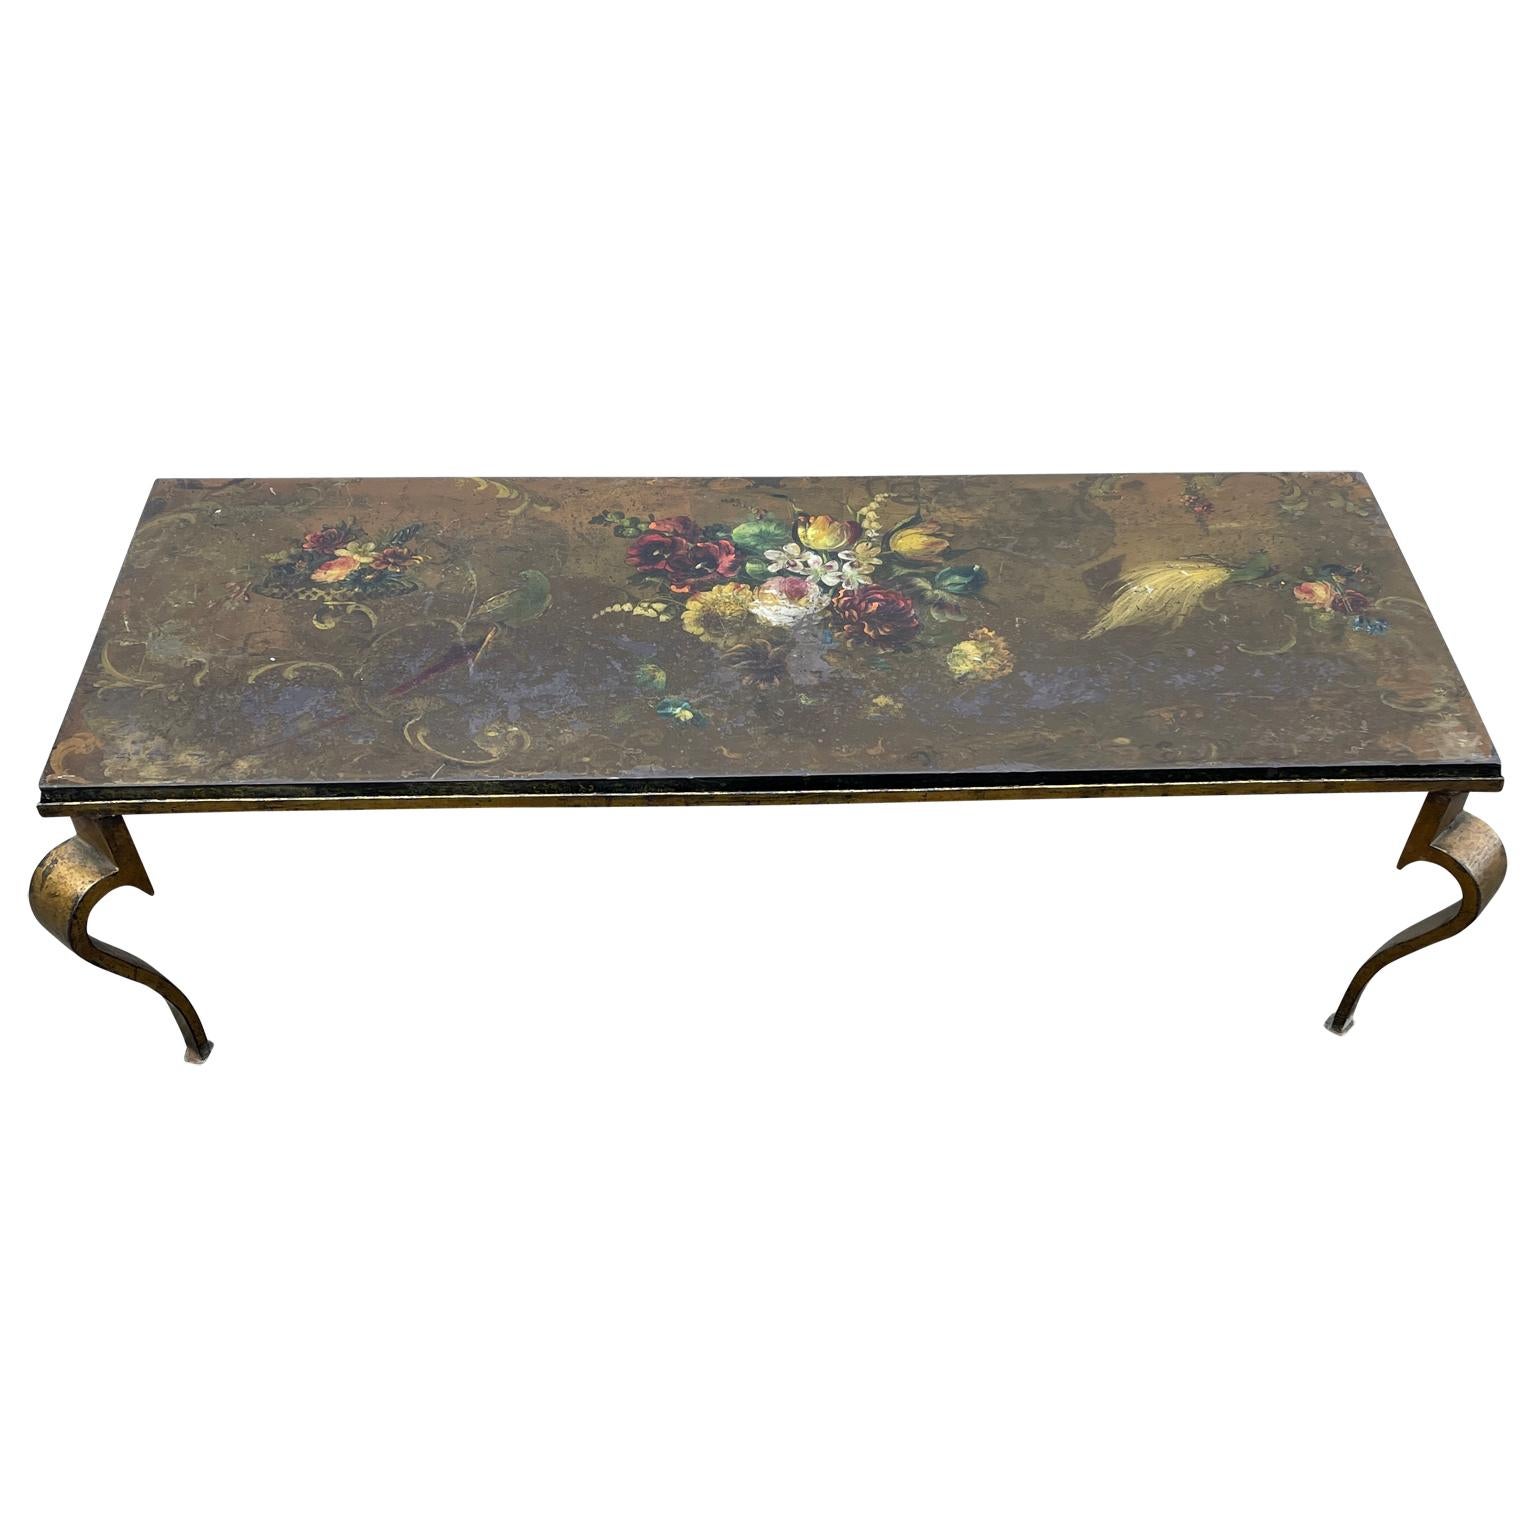 Hollywood Regency Vintage Italian Hand-painted Rectangular Cocktail Table, Circa 1950 For Sale